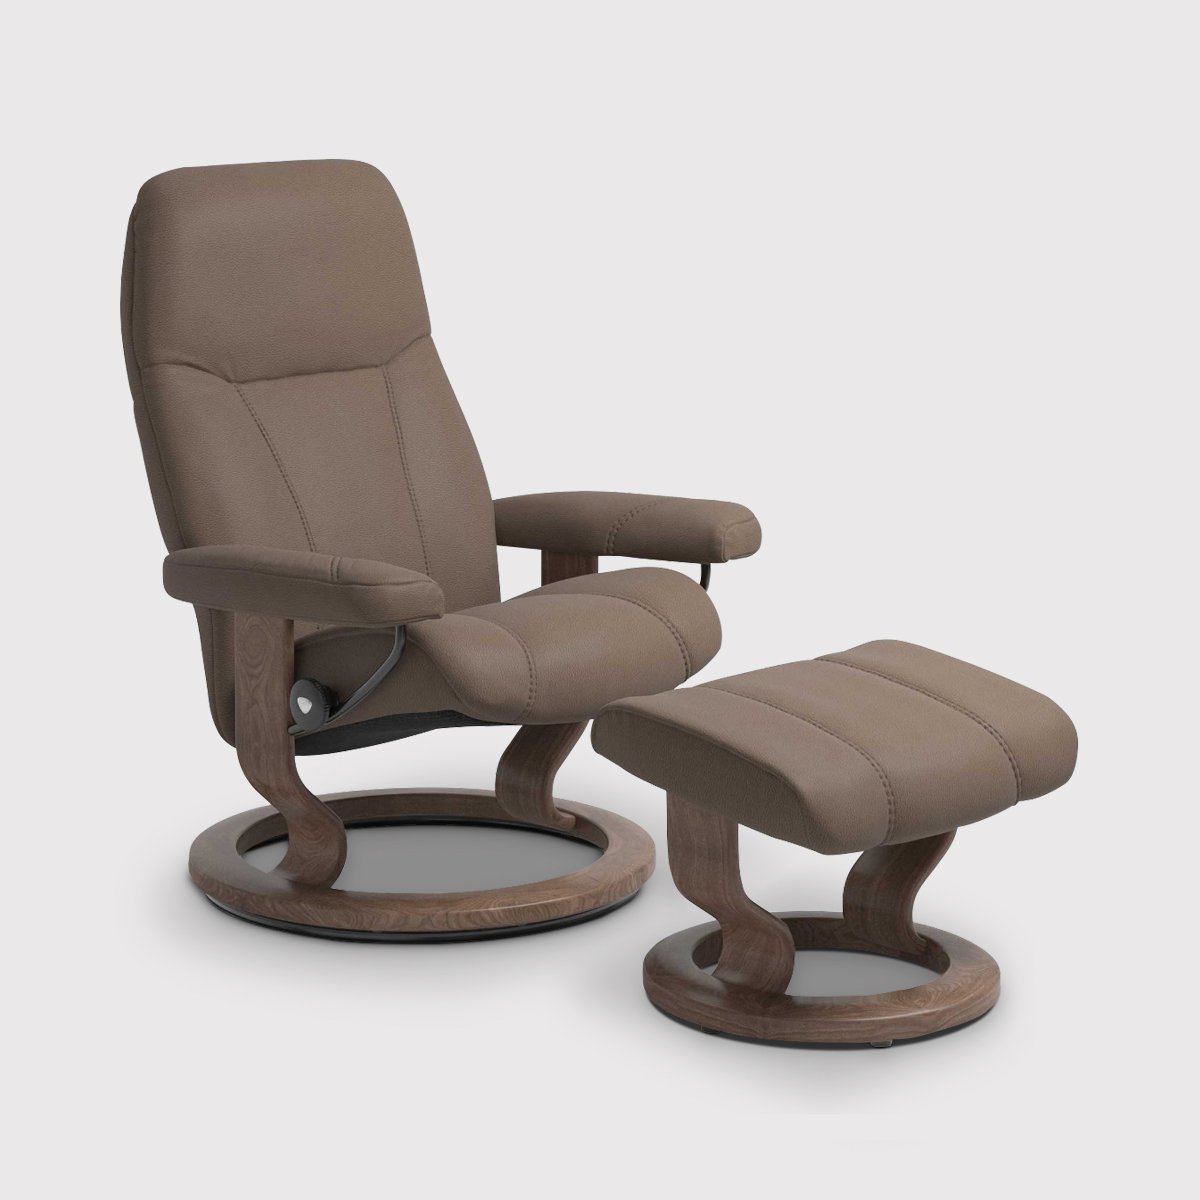 Stressless Consul Medium Recliner Chair & Stool, Brown Leather | Barker & Stonehouse